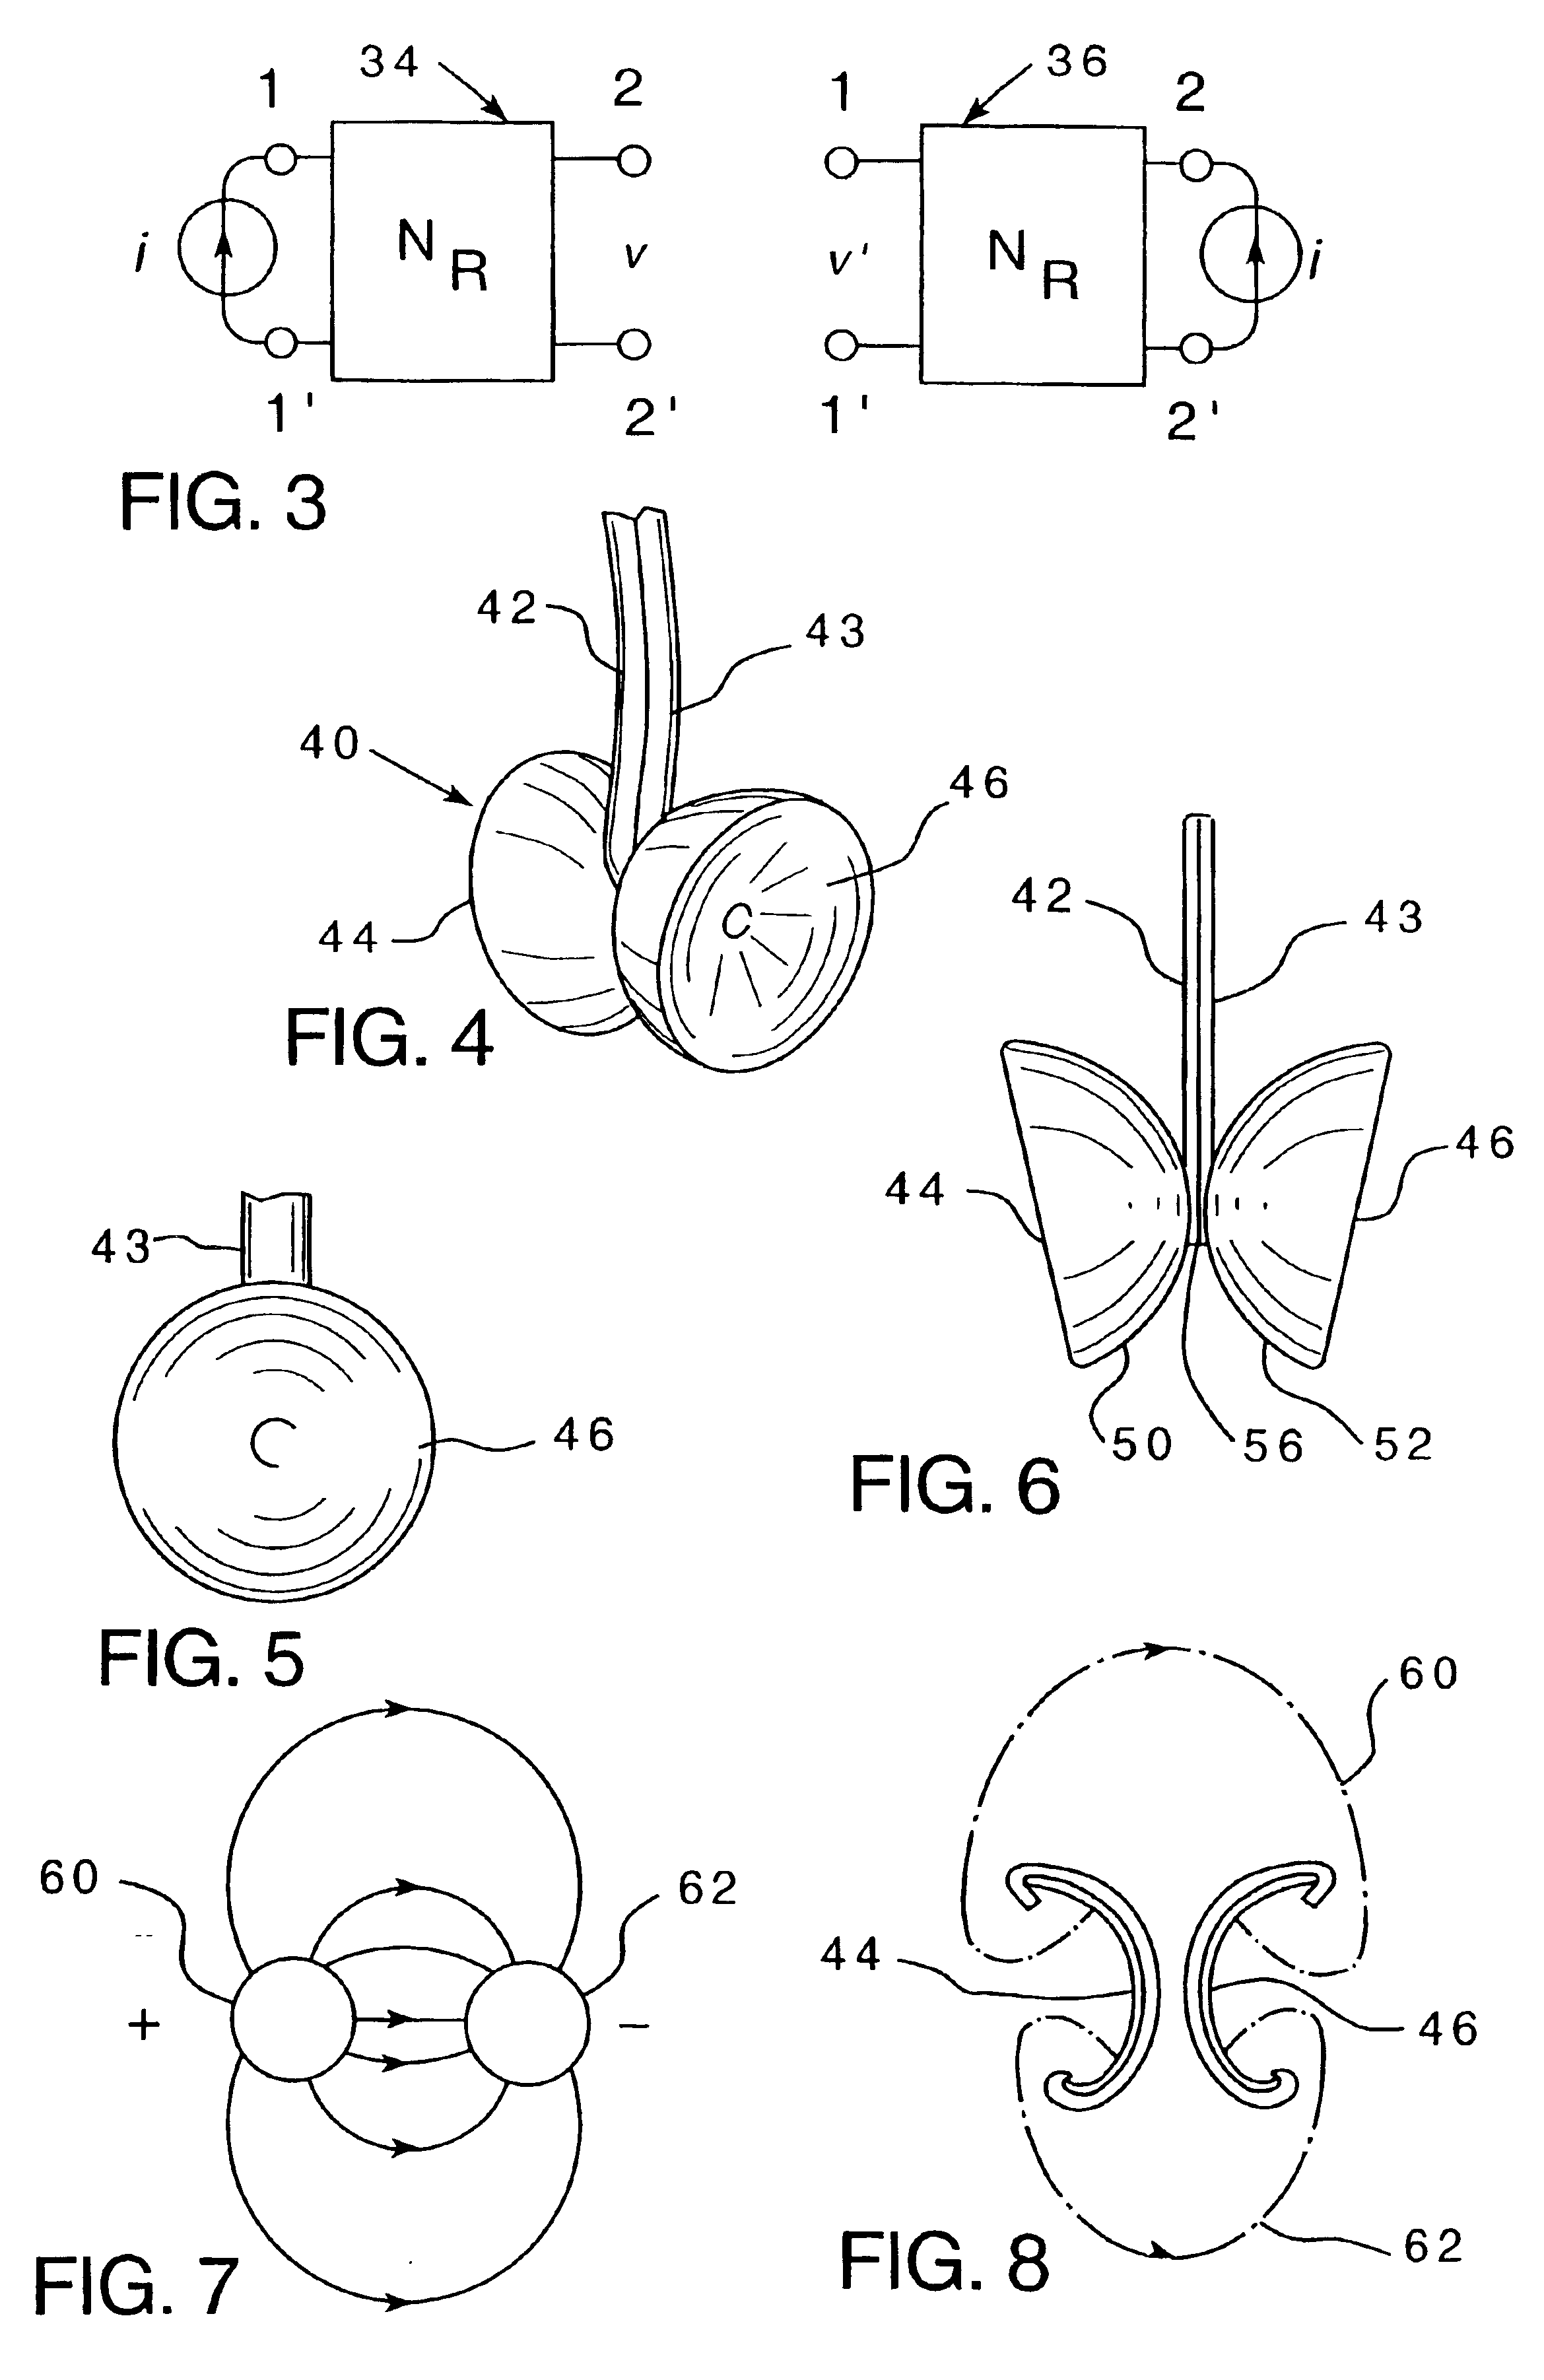 Method of data communication with implanted device and associated apparatus